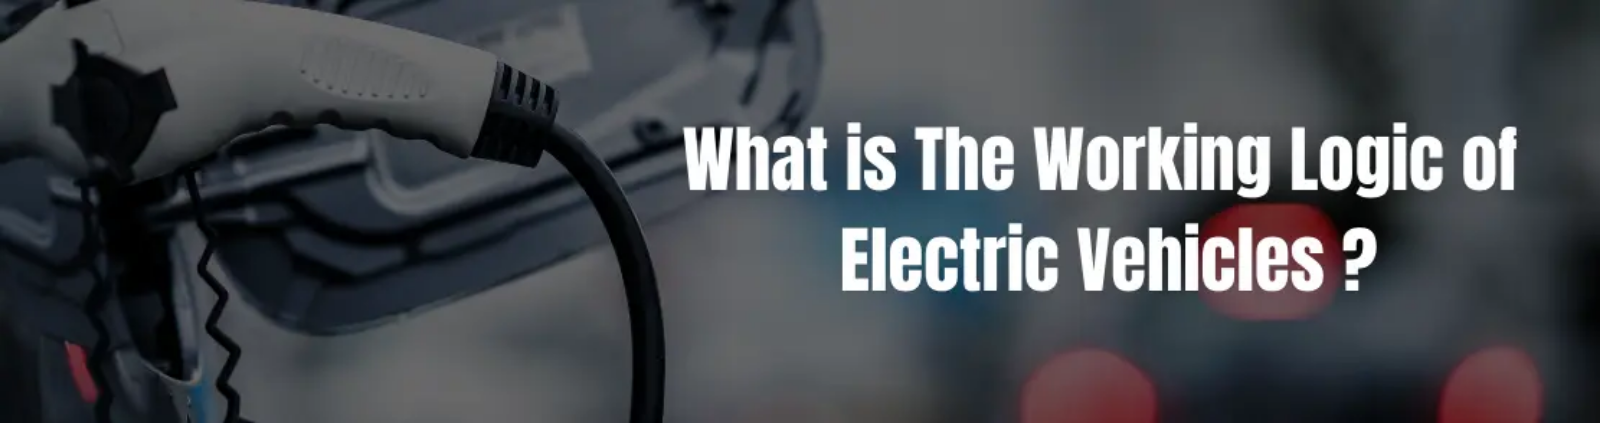 What is the working logic of electric vehicles ?